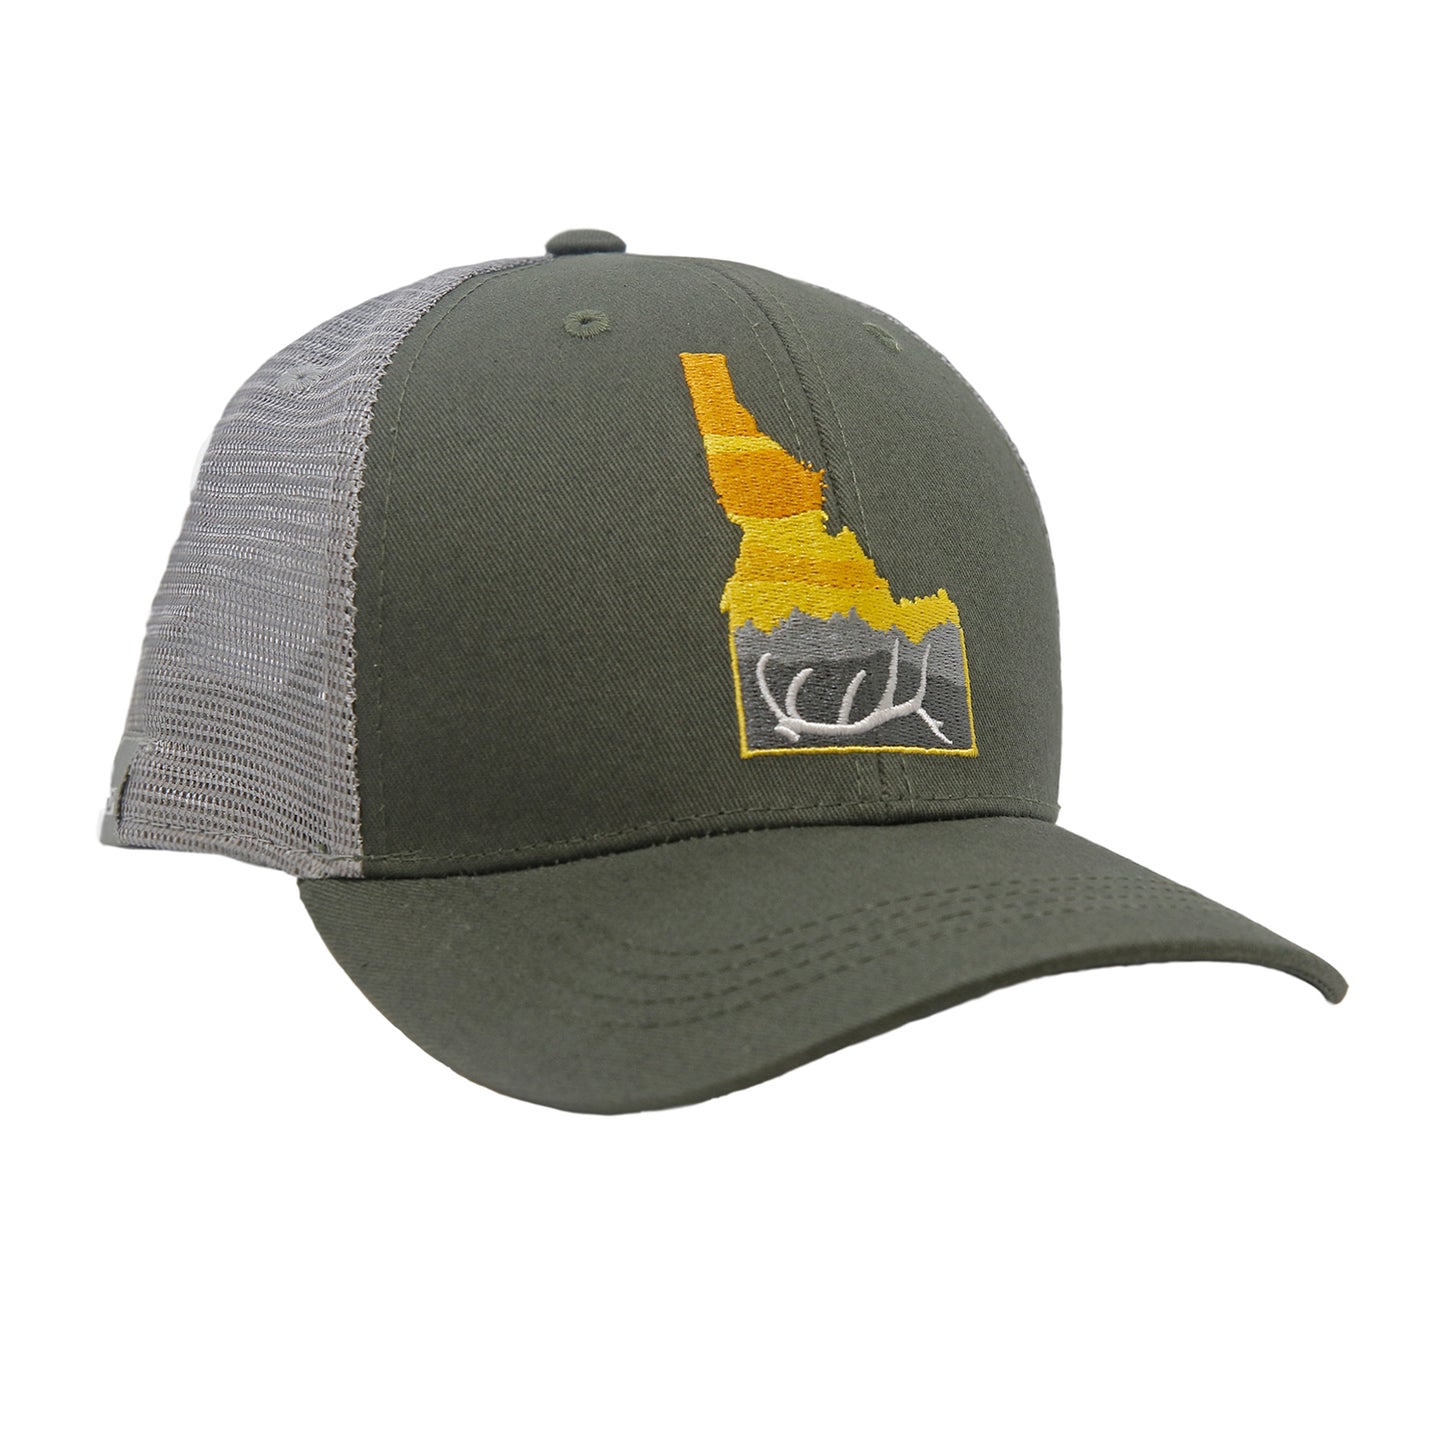 A hat with gray mesh and a green fabric front has the shape of idaho with a elk angler inside of it